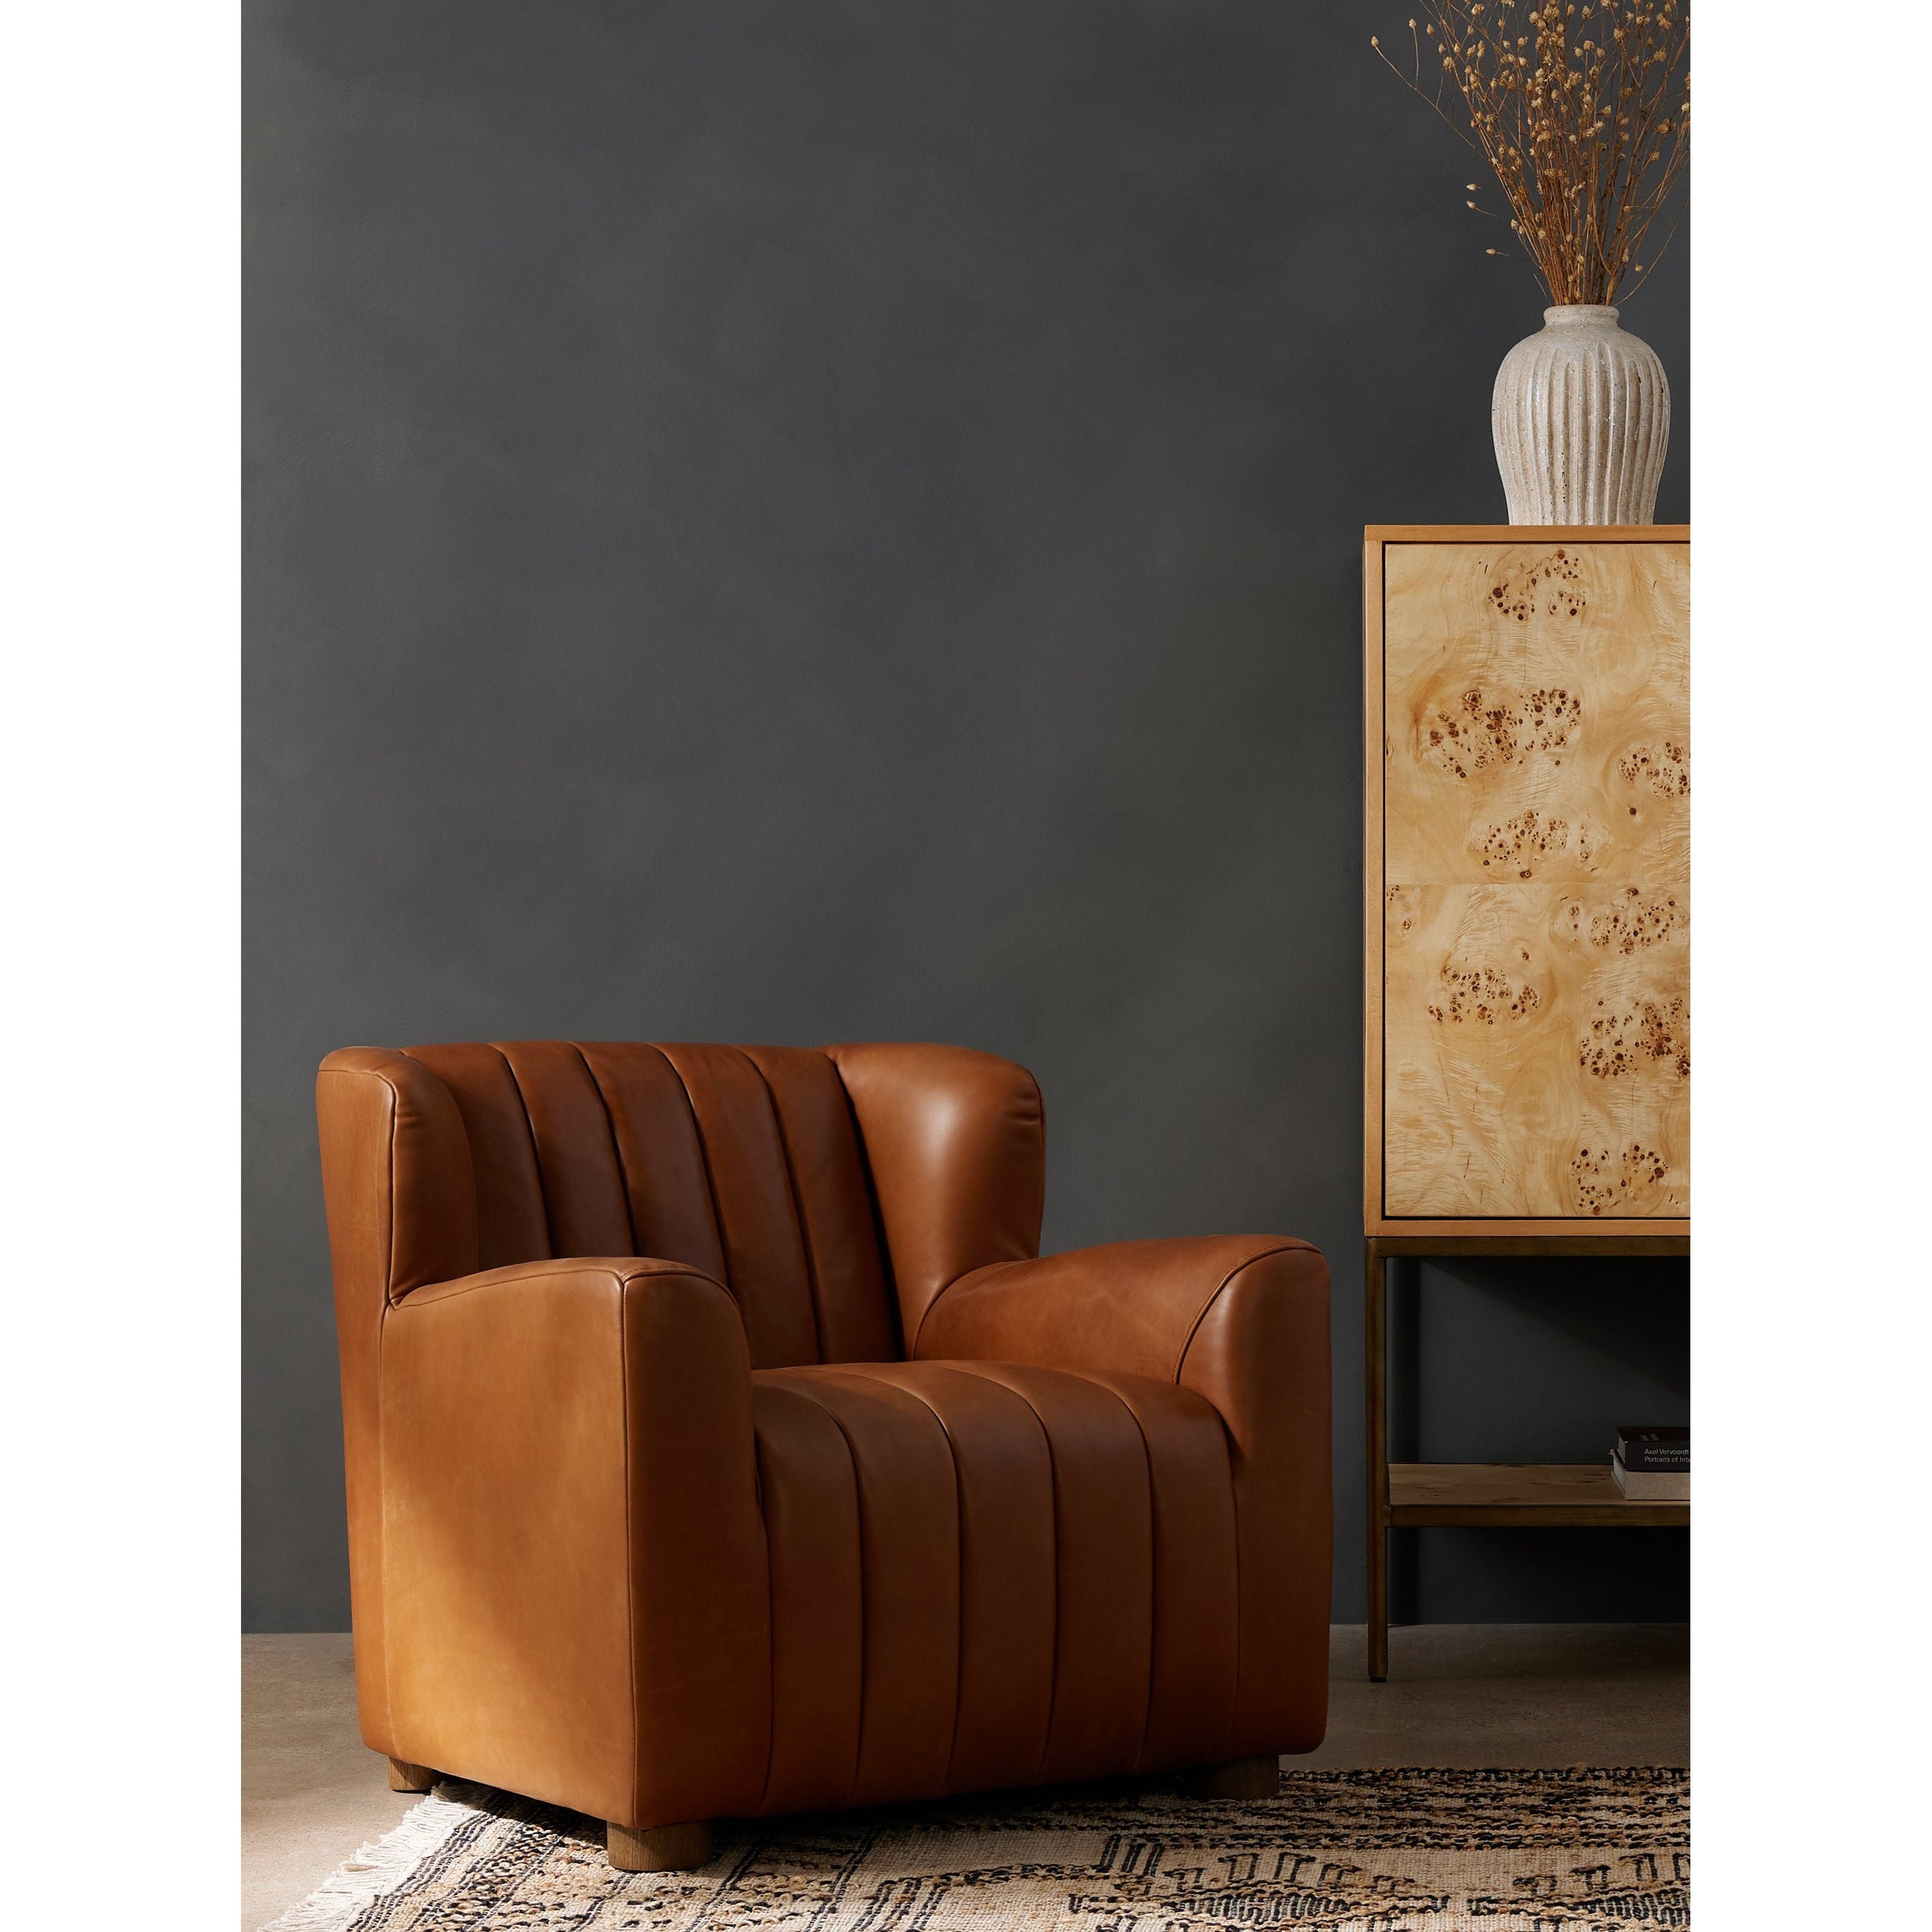 The classic wing-back club chair adopts heavy channeling for an even-comfier sit. Tobacco top-grain leather brings this retro lounge-inspired chair up to modern speed. Amethyst Home provides interior design, new construction, custom furniture, and area rugs in the Newport Beach metro area.